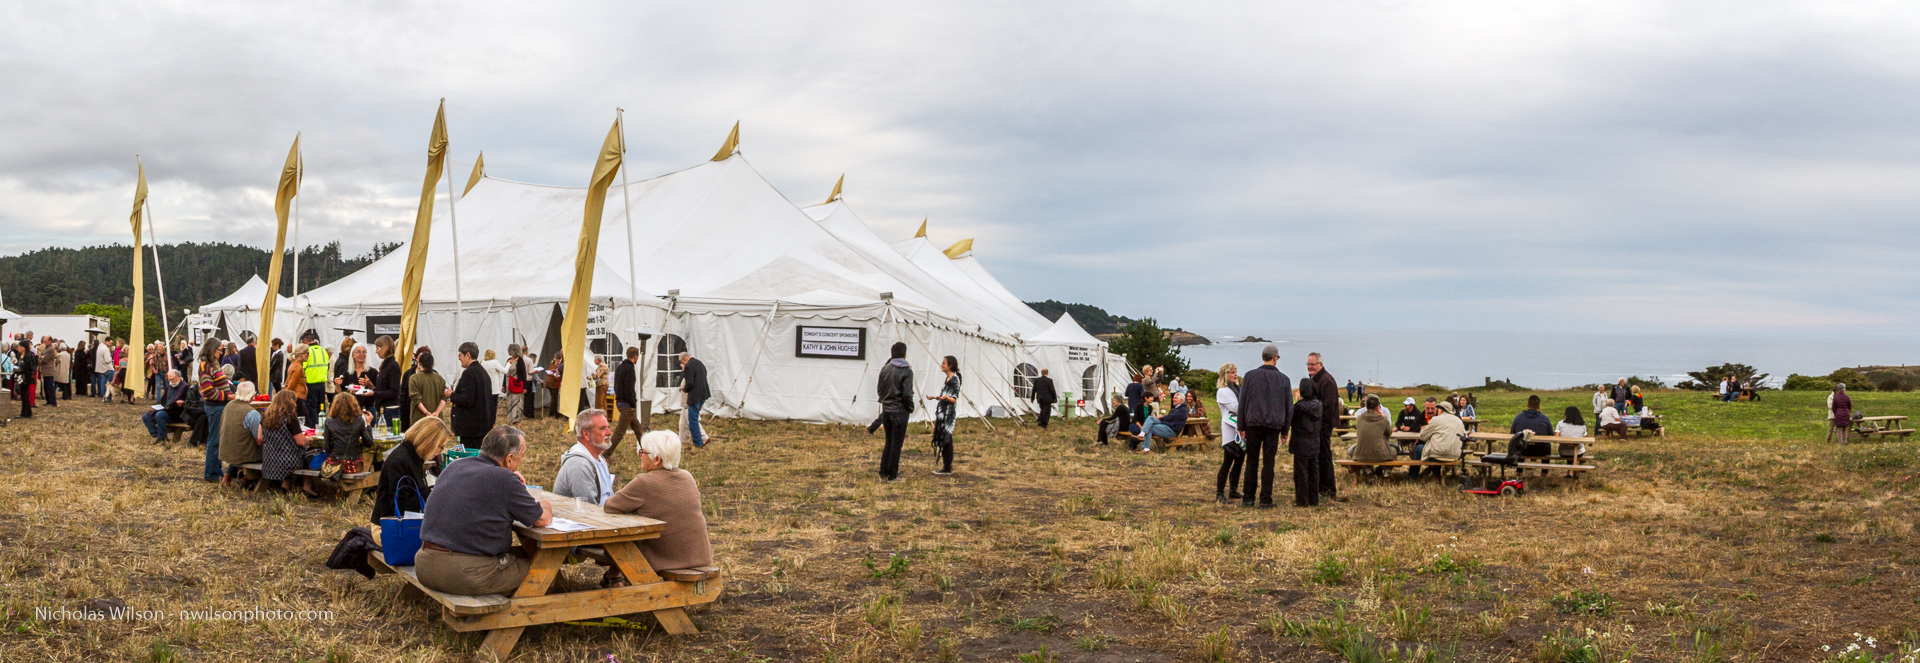 Audience members picnic outside the 800 seat tent concert hall before the opening concert July 11, 2015.